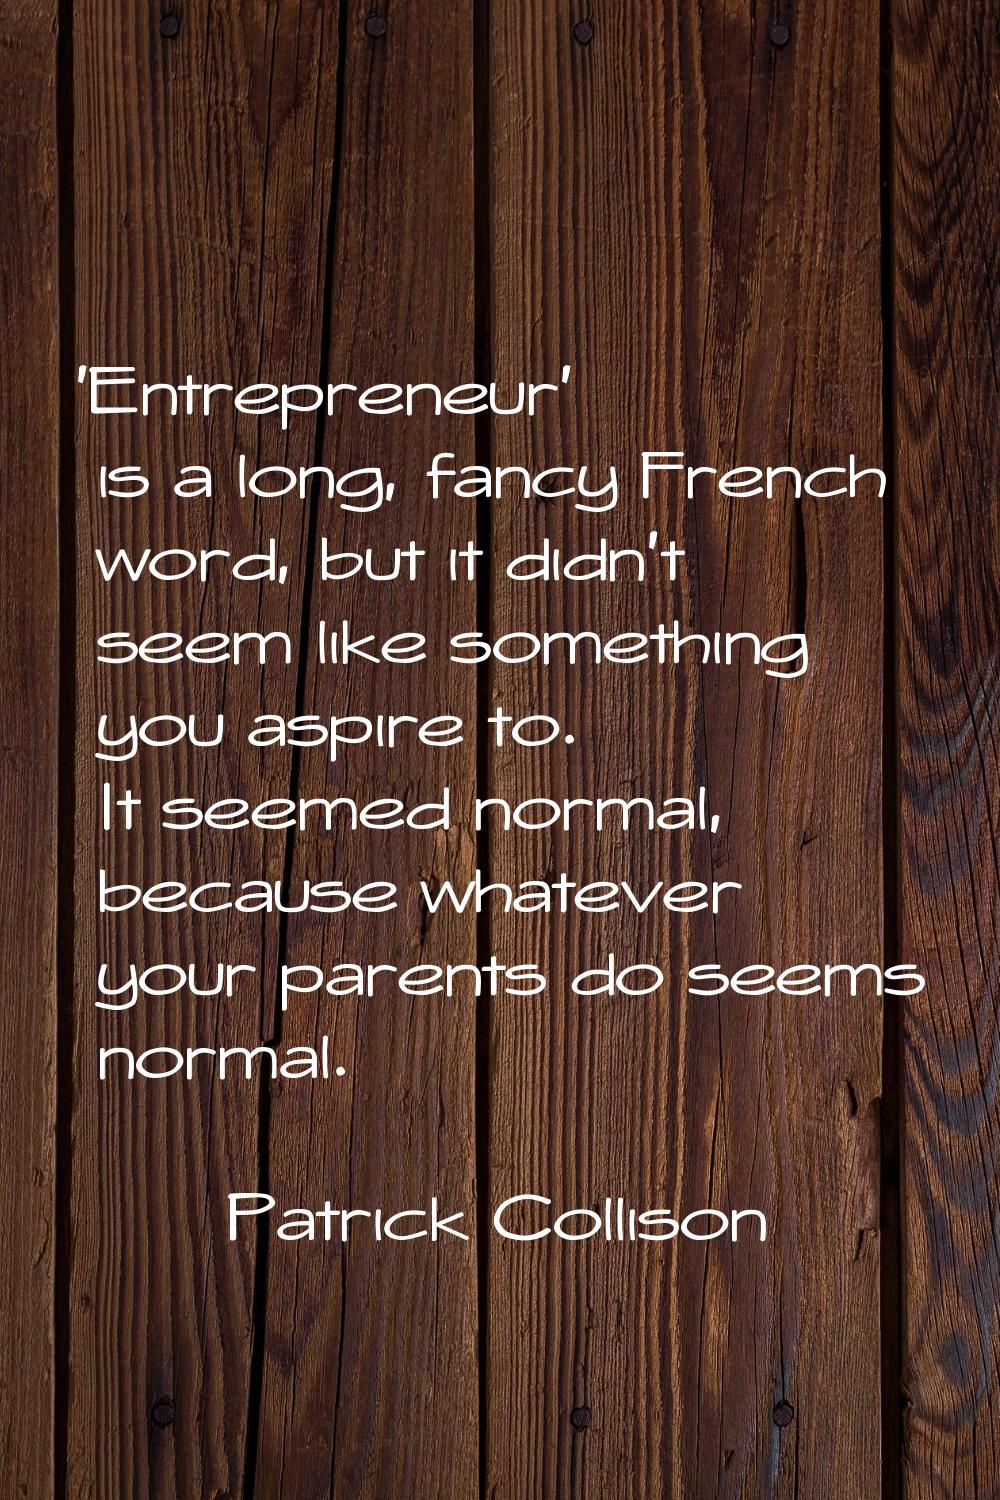 'Entrepreneur' is a long, fancy French word, but it didn't seem like something you aspire to. It se